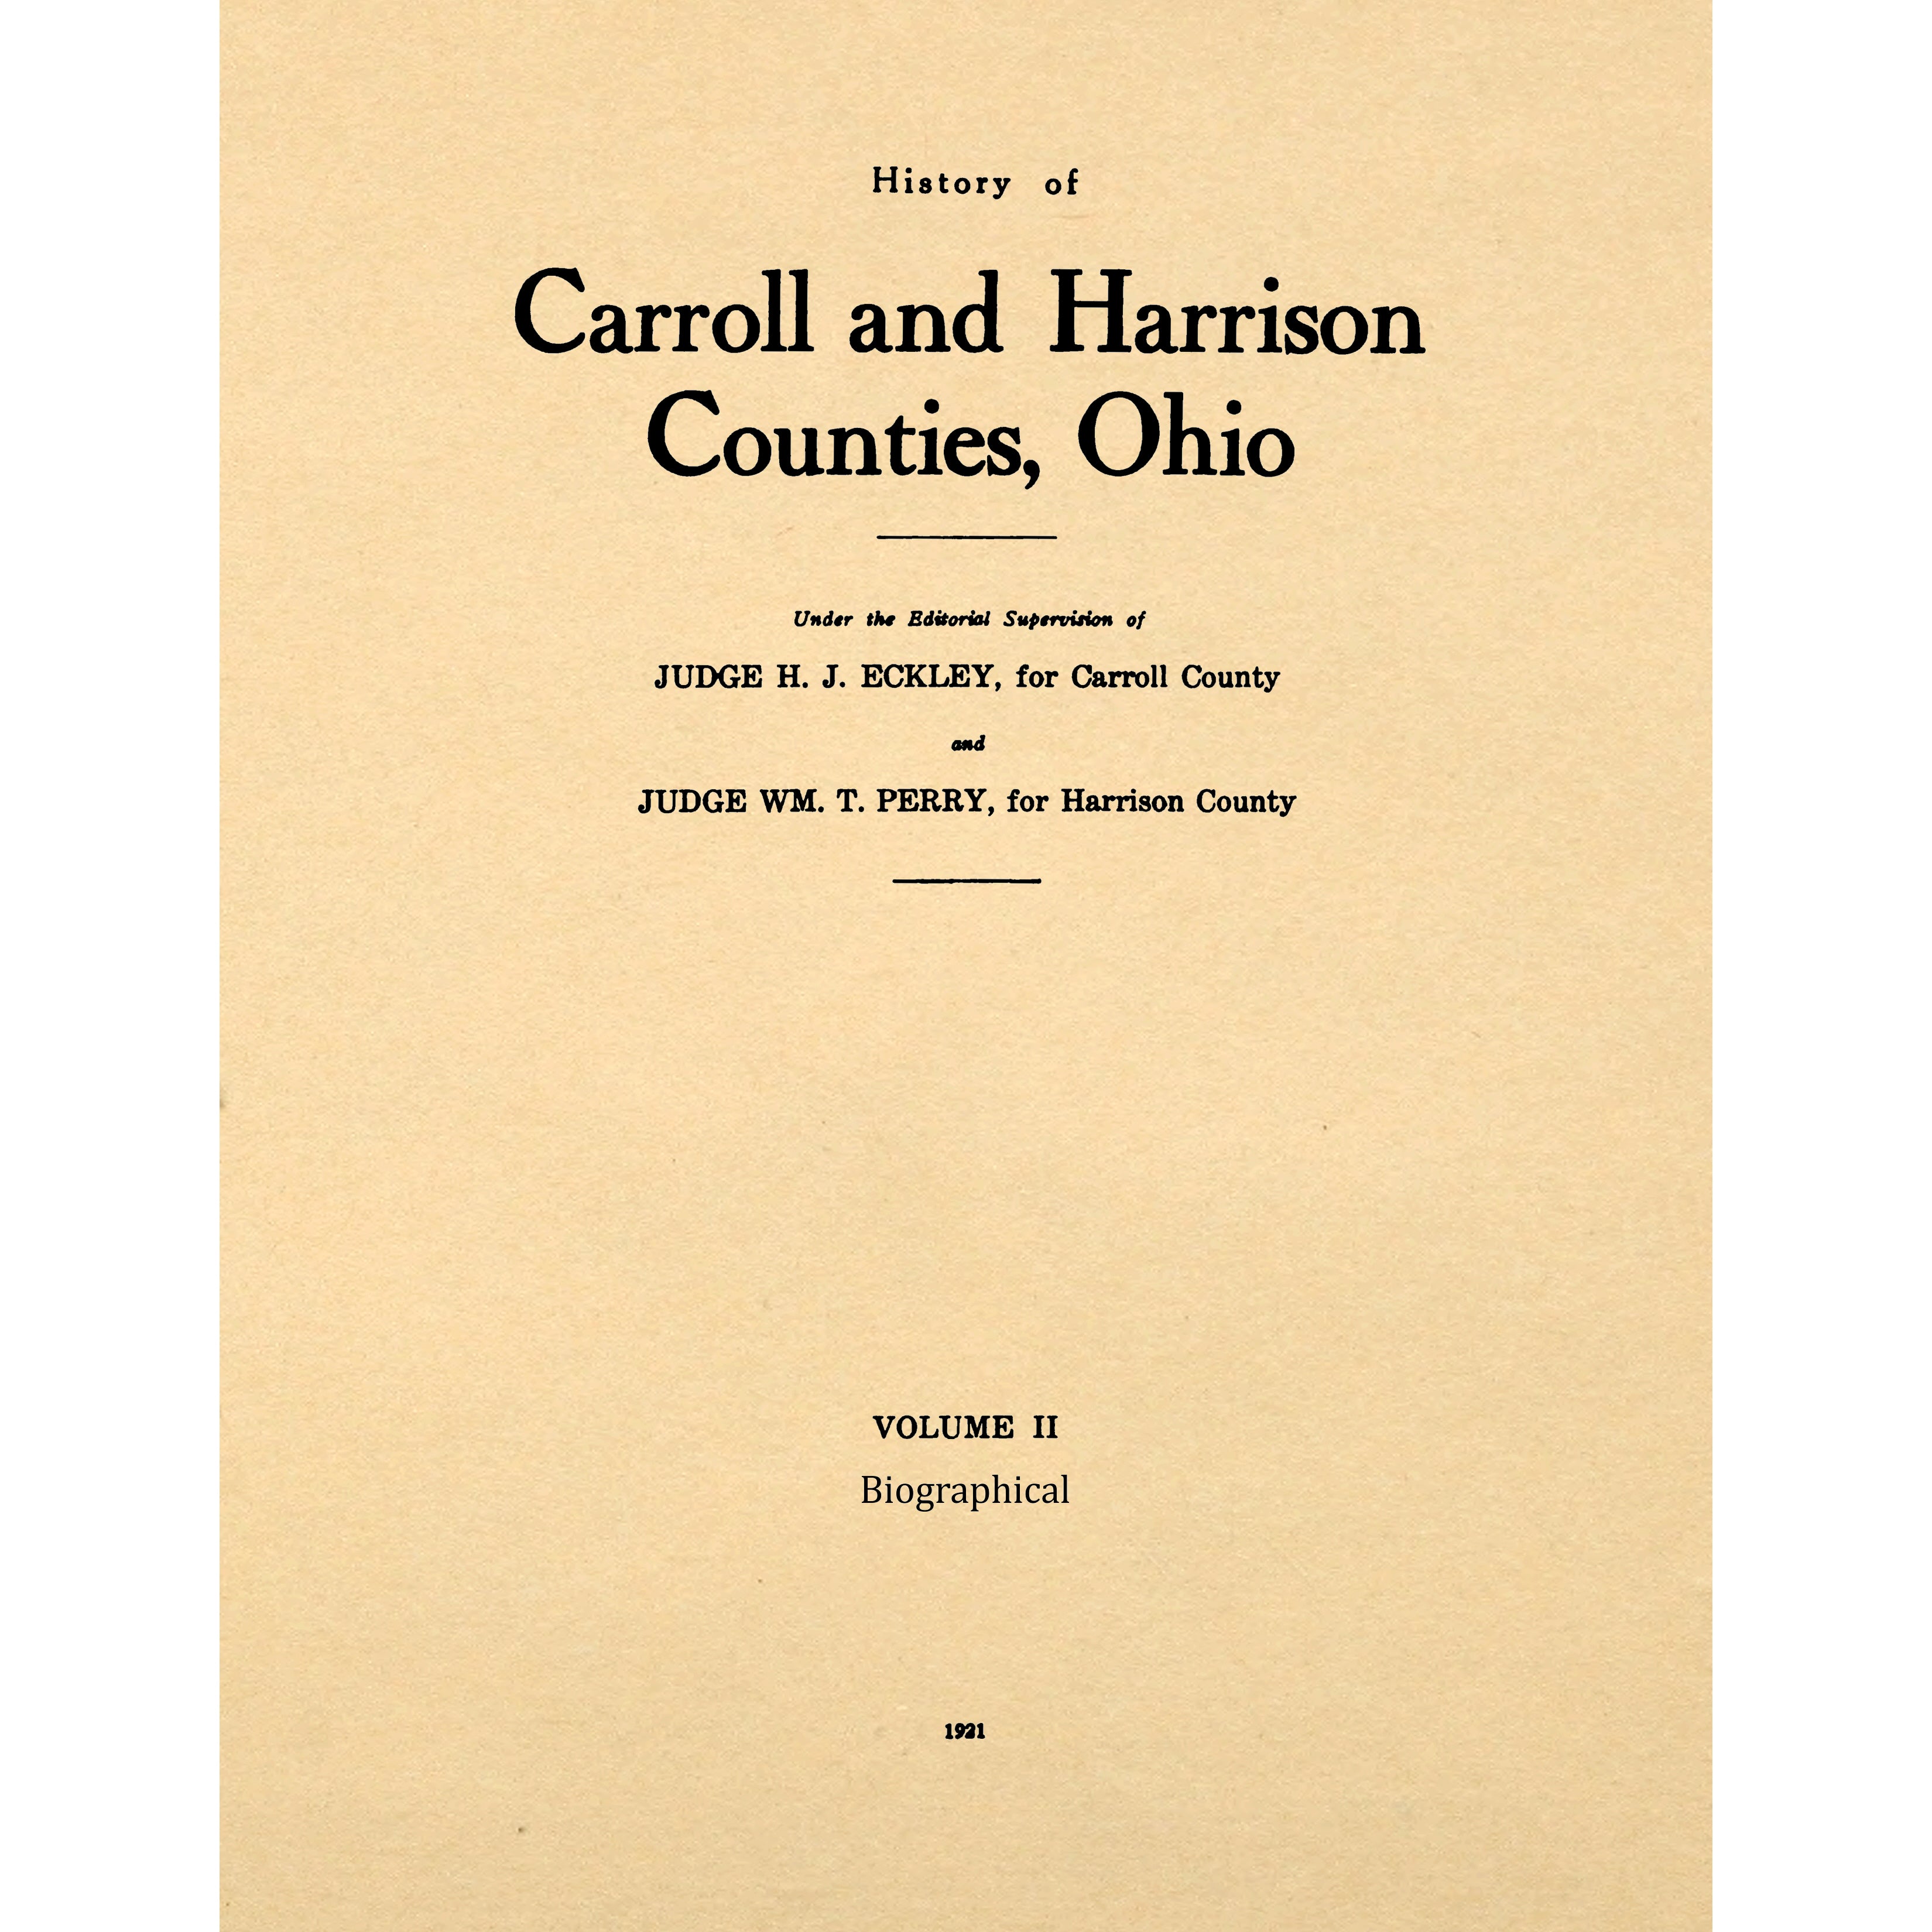 History of Carroll and Harrison Counties, Ohio Volume II - Biographical